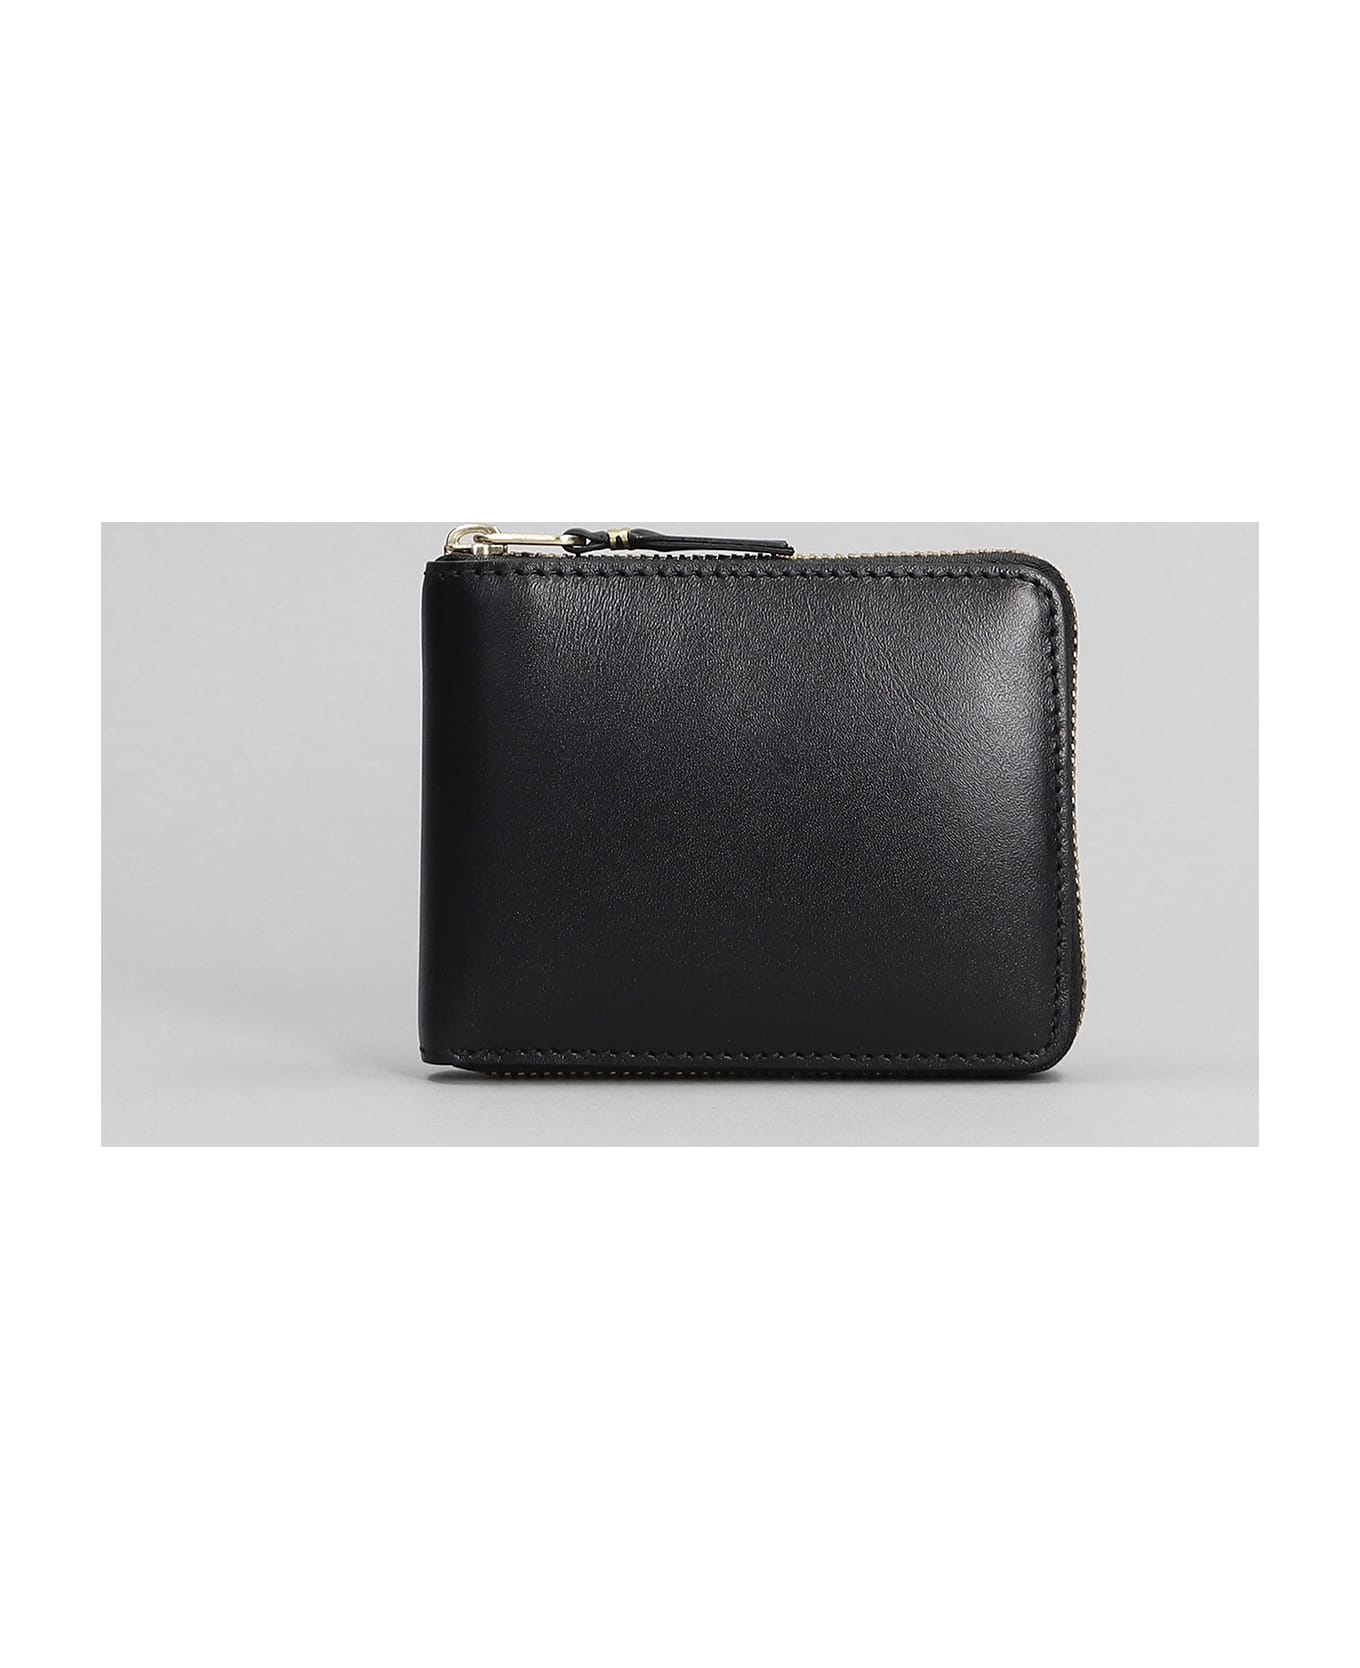 Wallet In Black Leather - 1